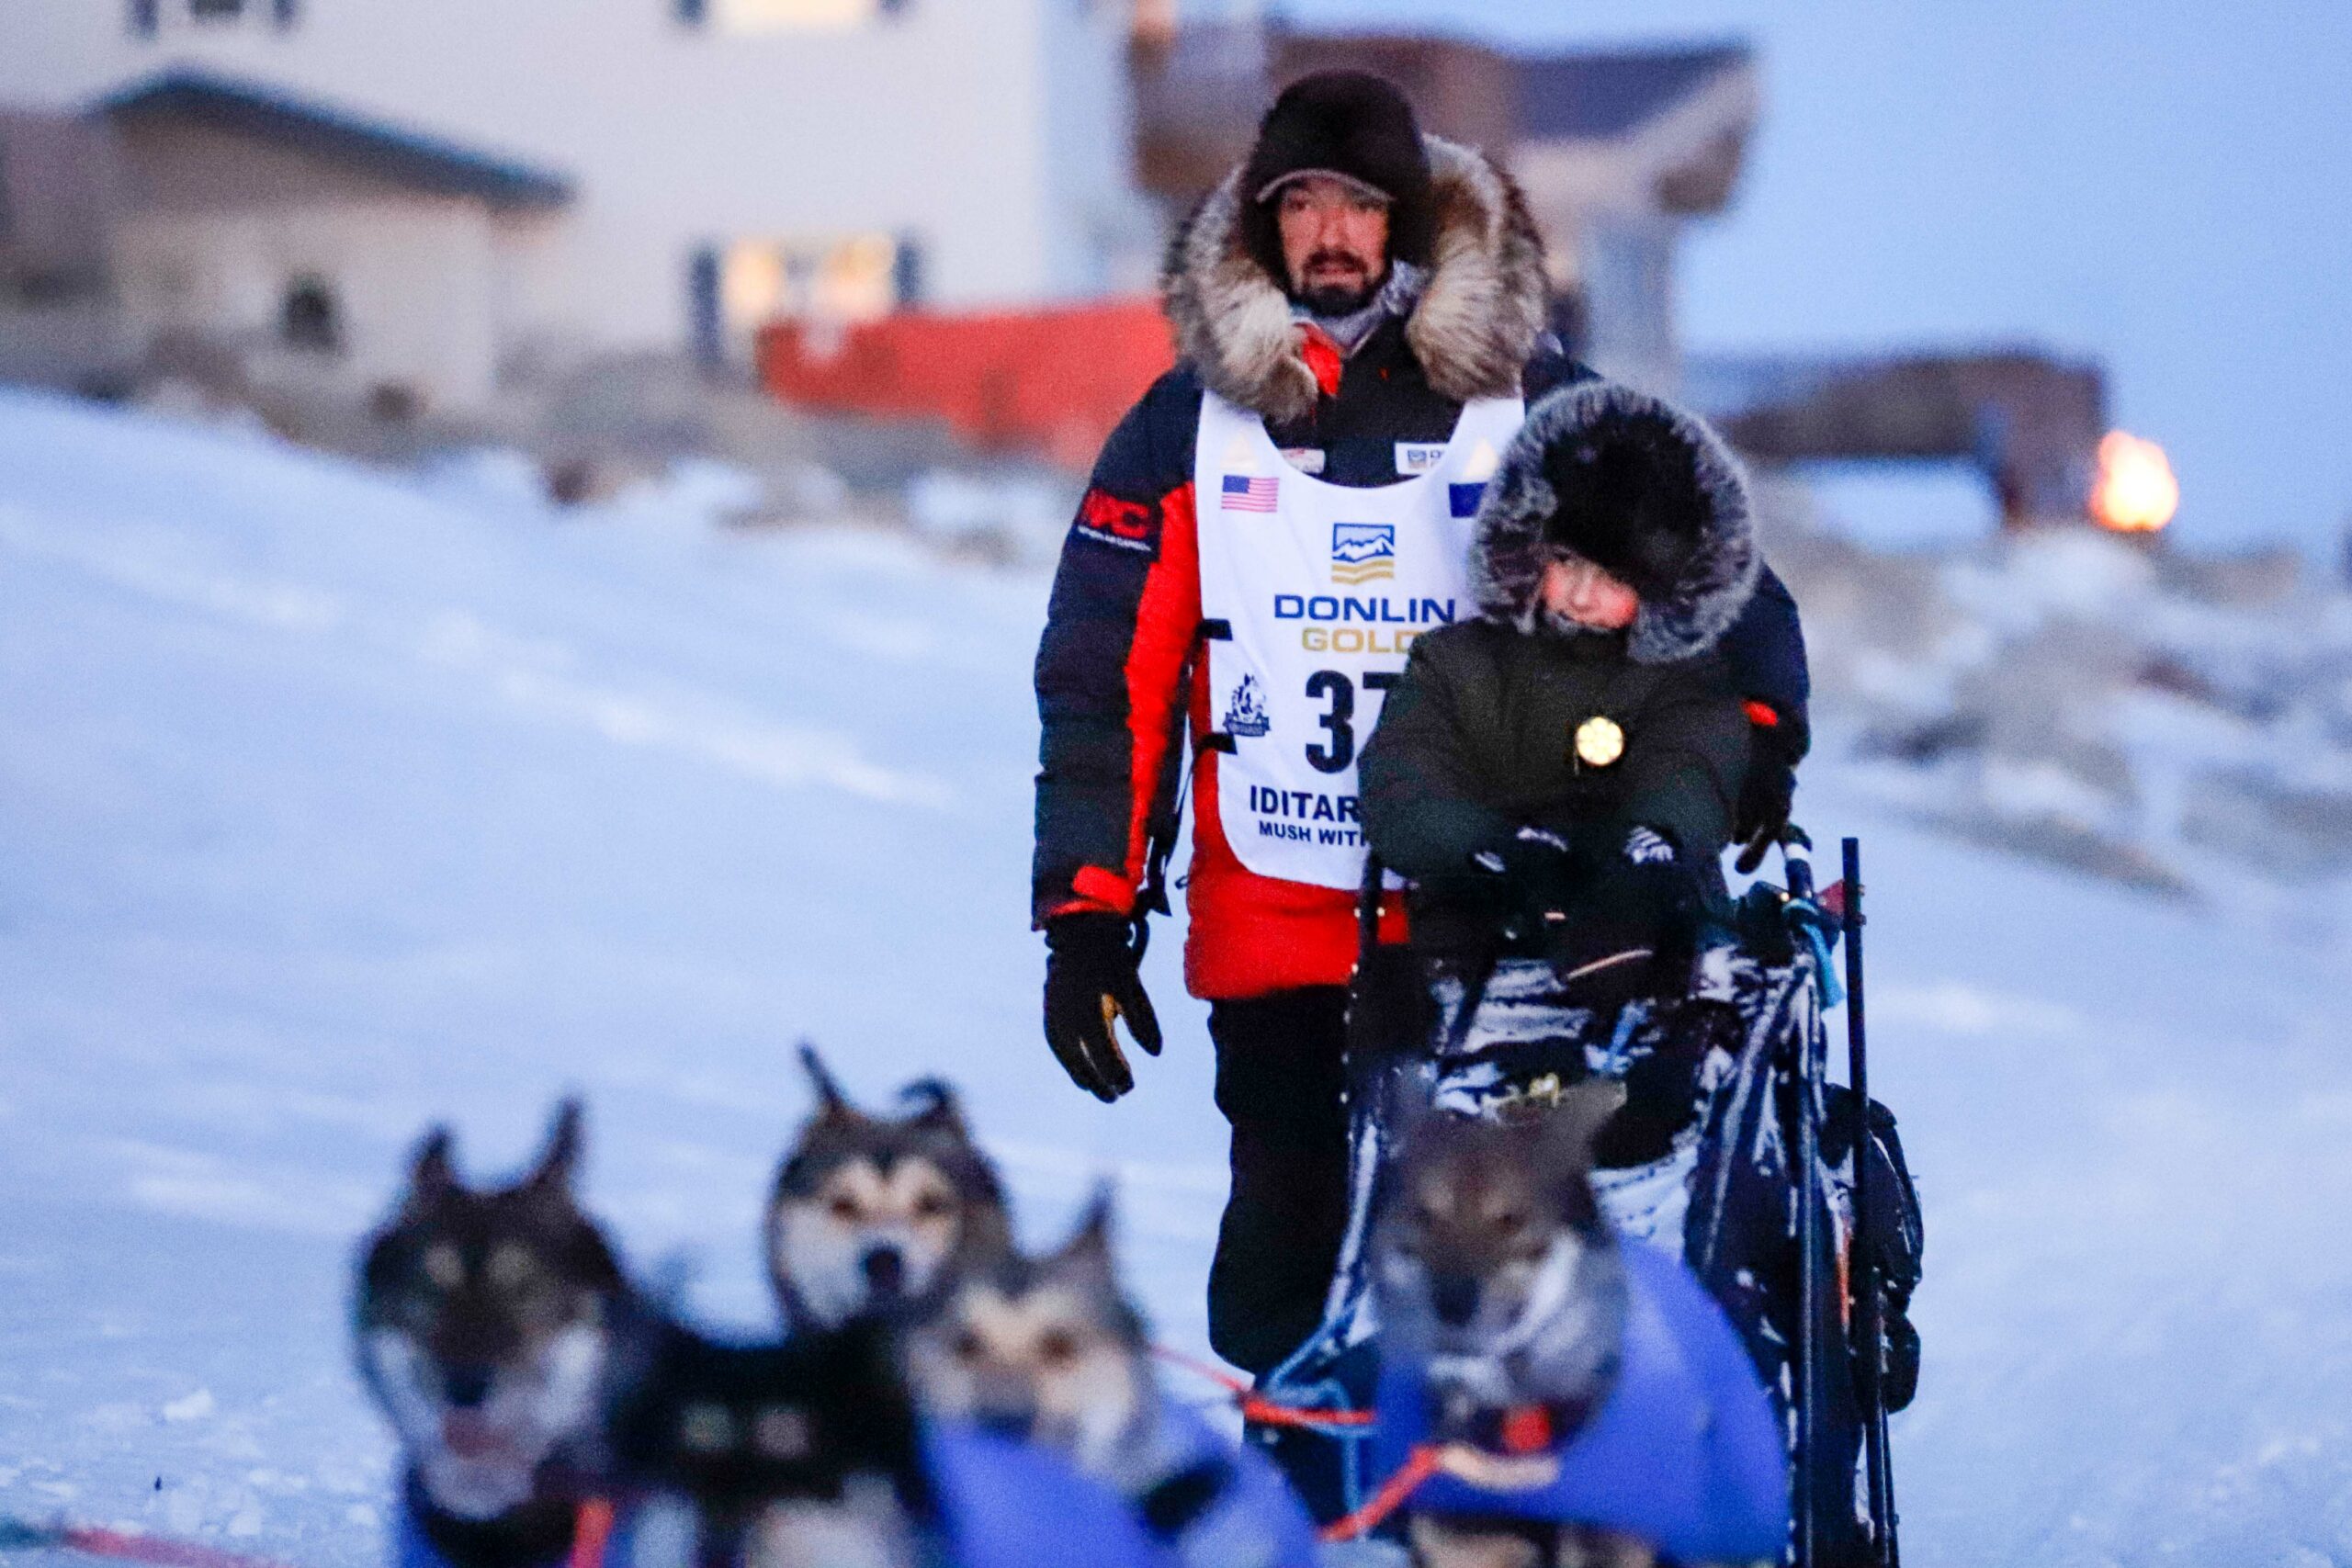 Kaiser finishes 5th in the 2022 Iditarod, followed by Richie in 6th - Alaska Public Media